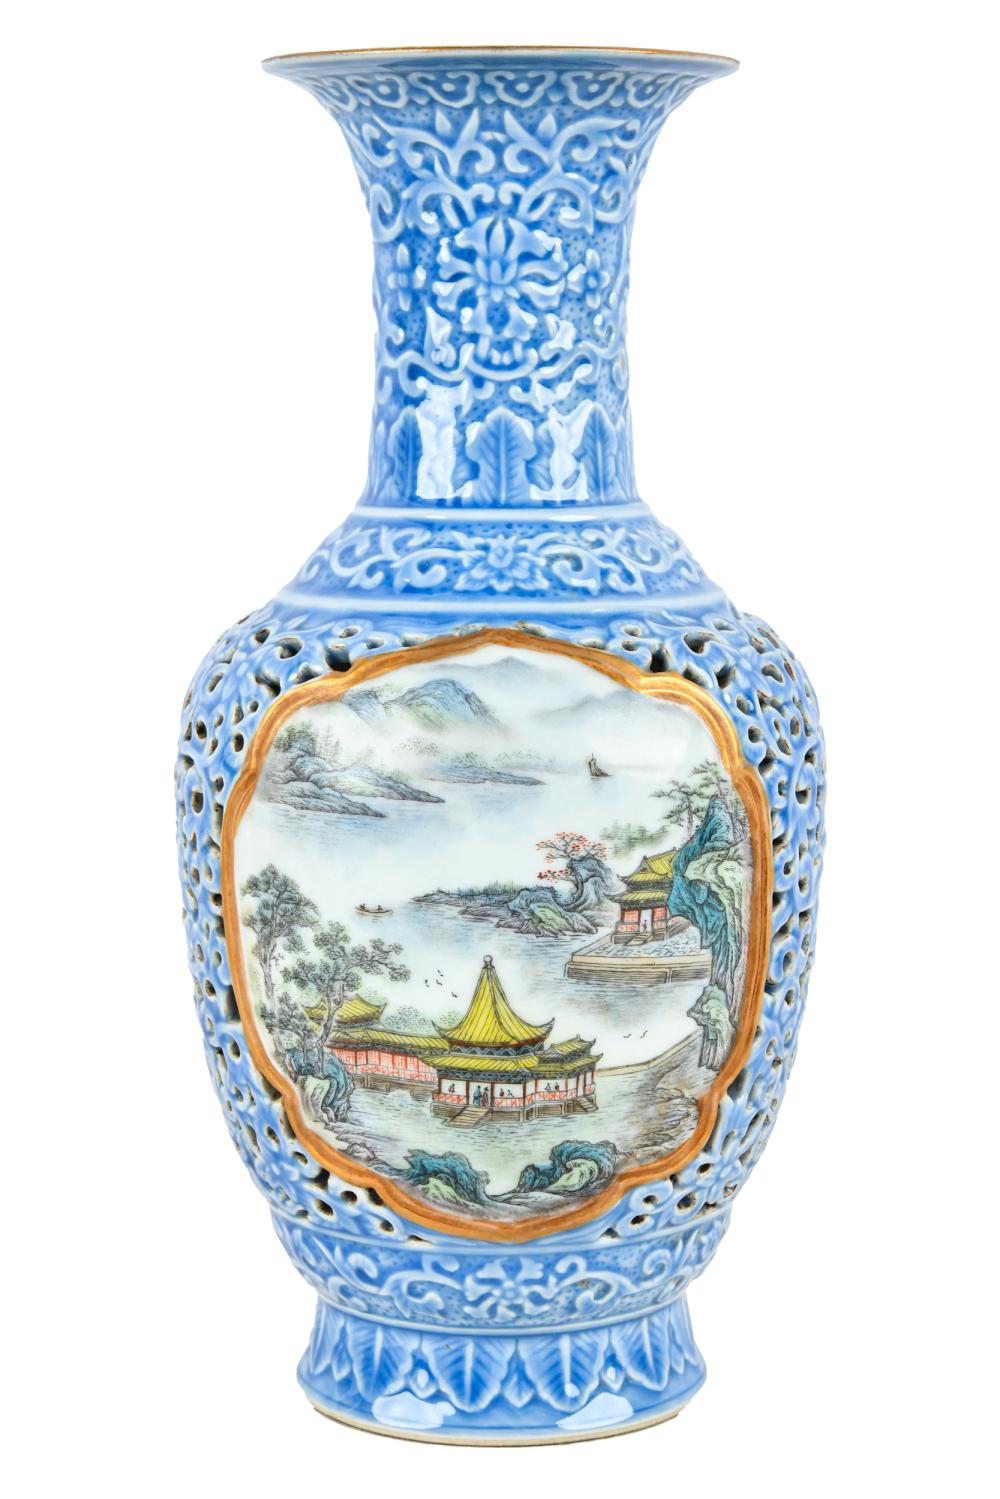 CHINESE RETICULATED PORCELAIN VASEwith 337518